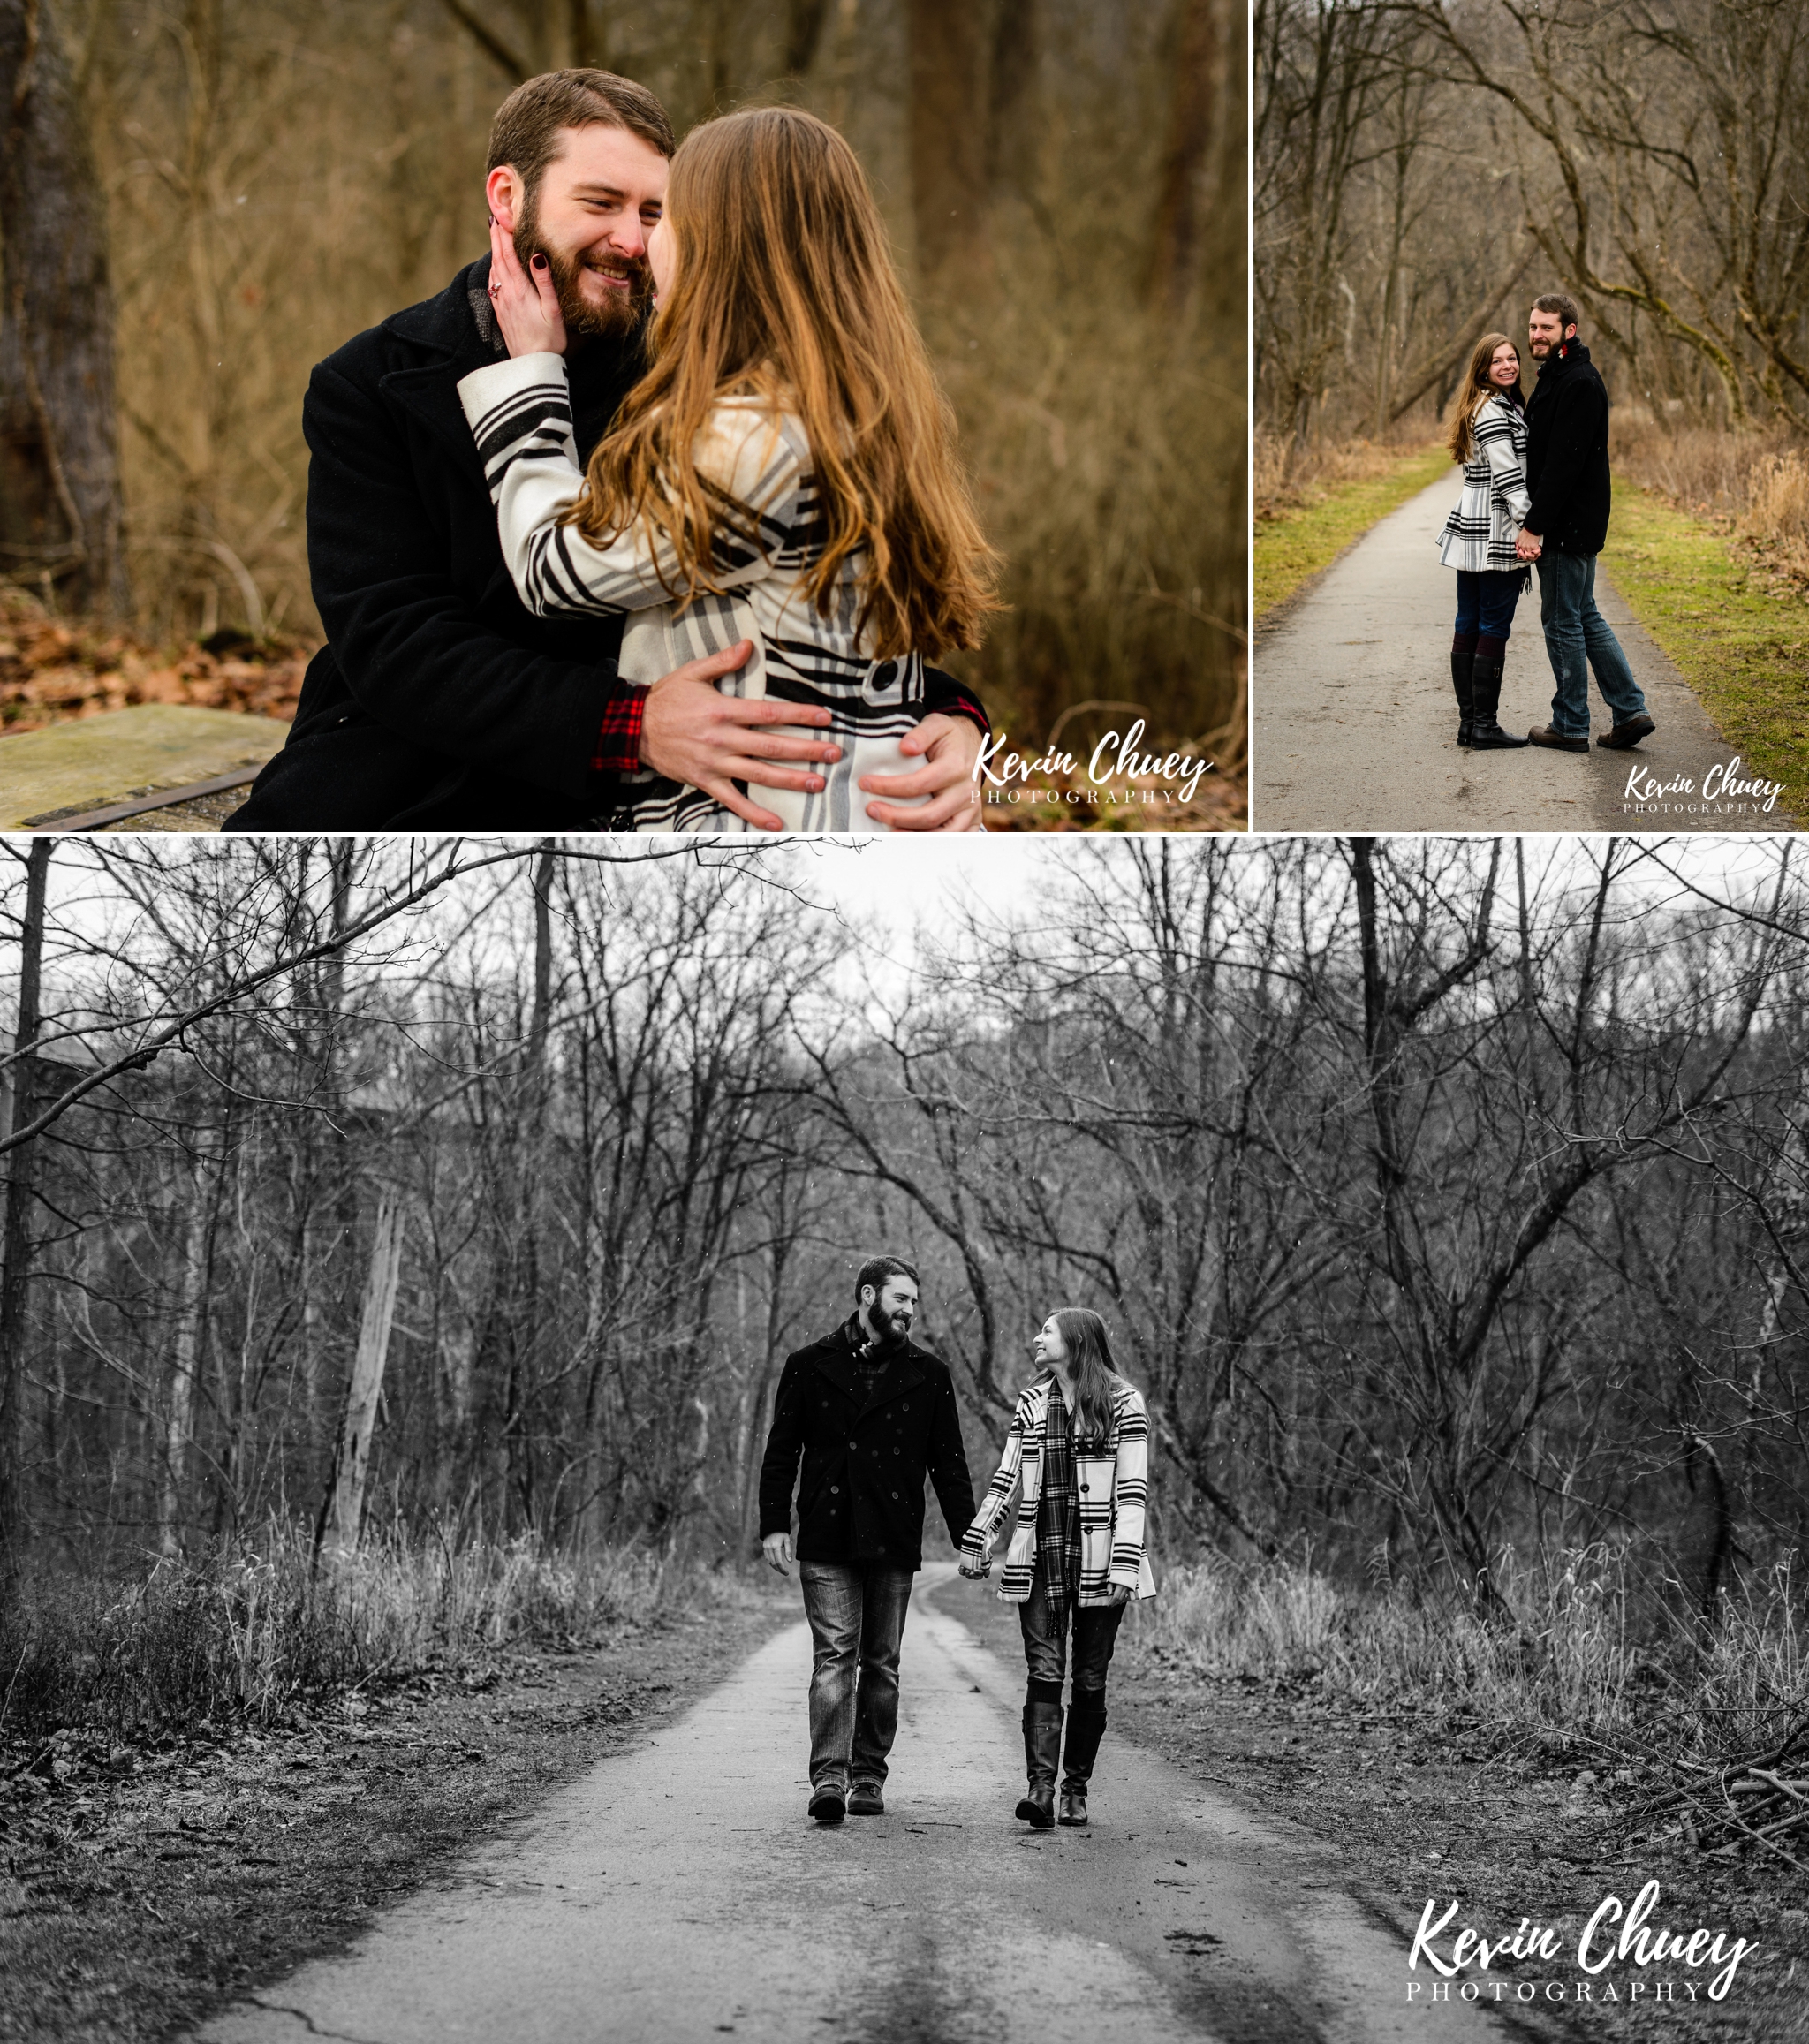 Cuyahoga Valley National Park Engagement Session